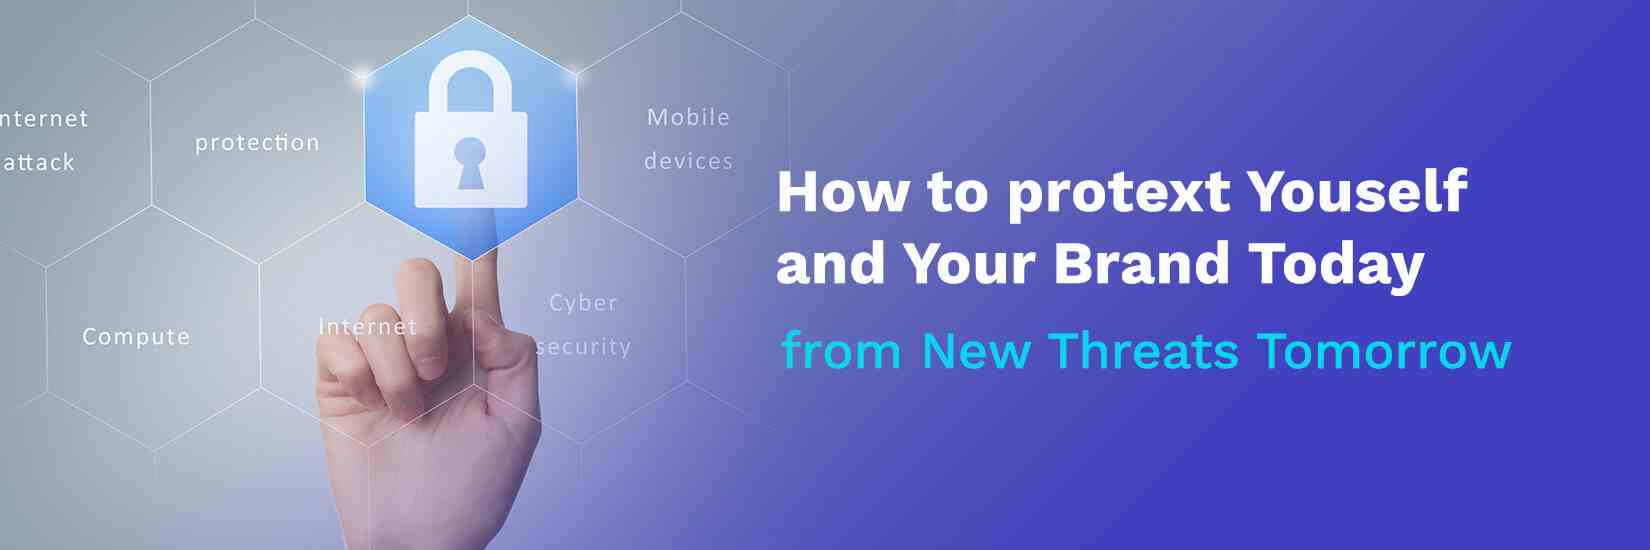 How to Protect Your Business from Cyber Threats Today